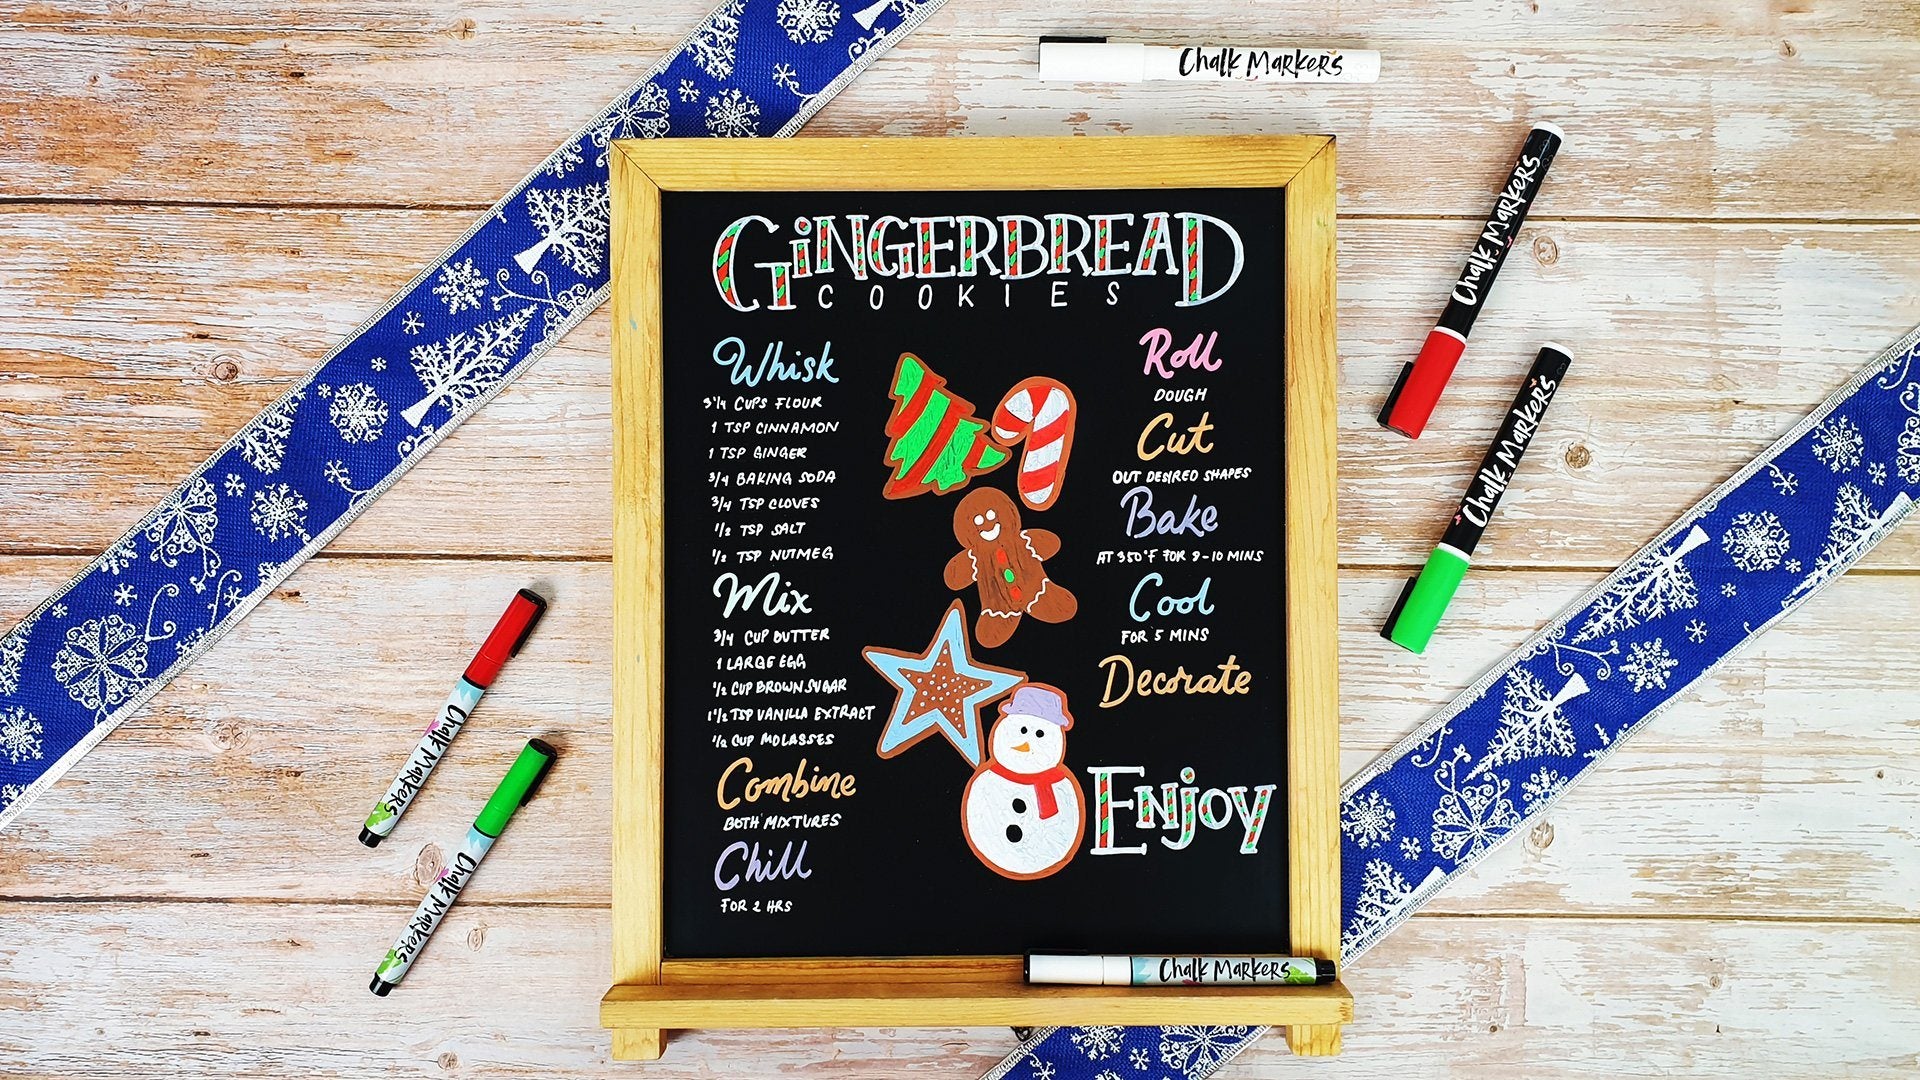 Design a Christmas Cookie Recipe on a Chalkboard Using Chalk Markers | Chalkola Art Supply